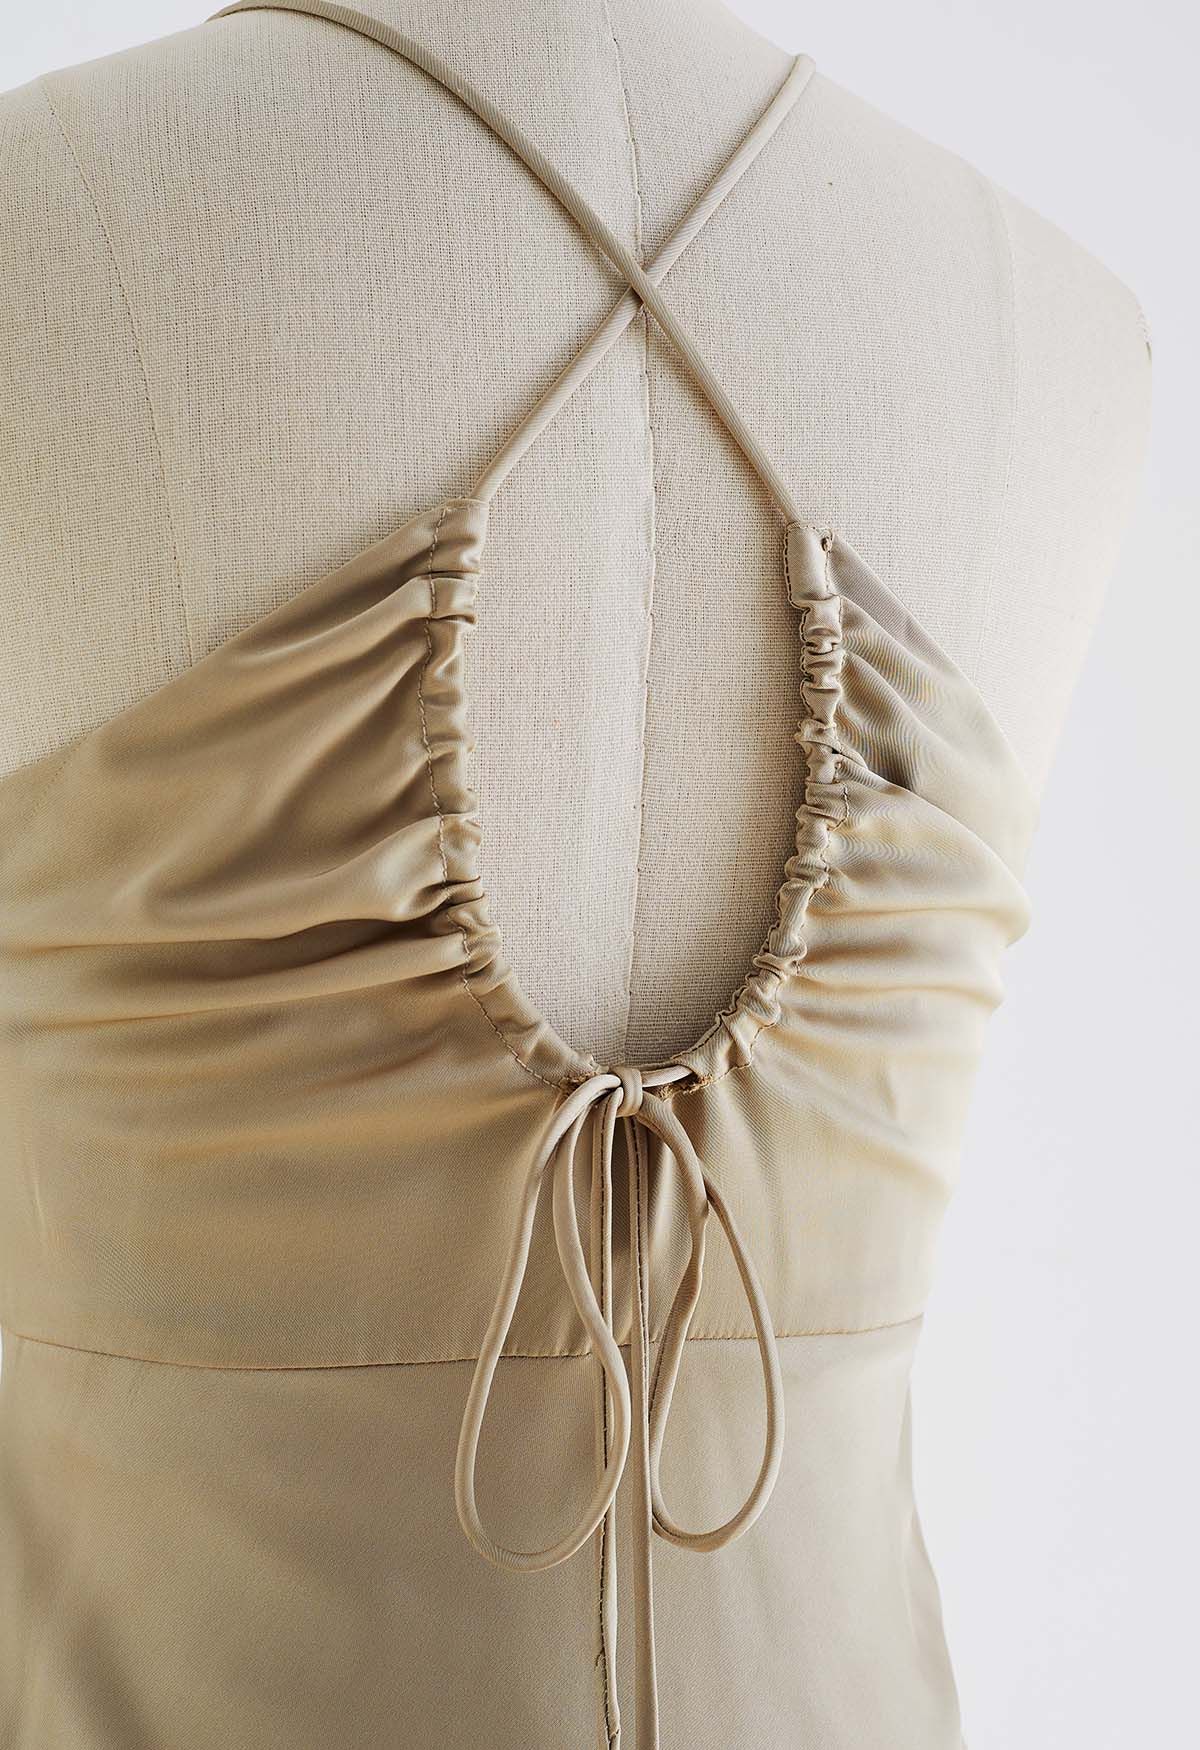 Crisscross Lace-Up Back Satin Dress in Sand